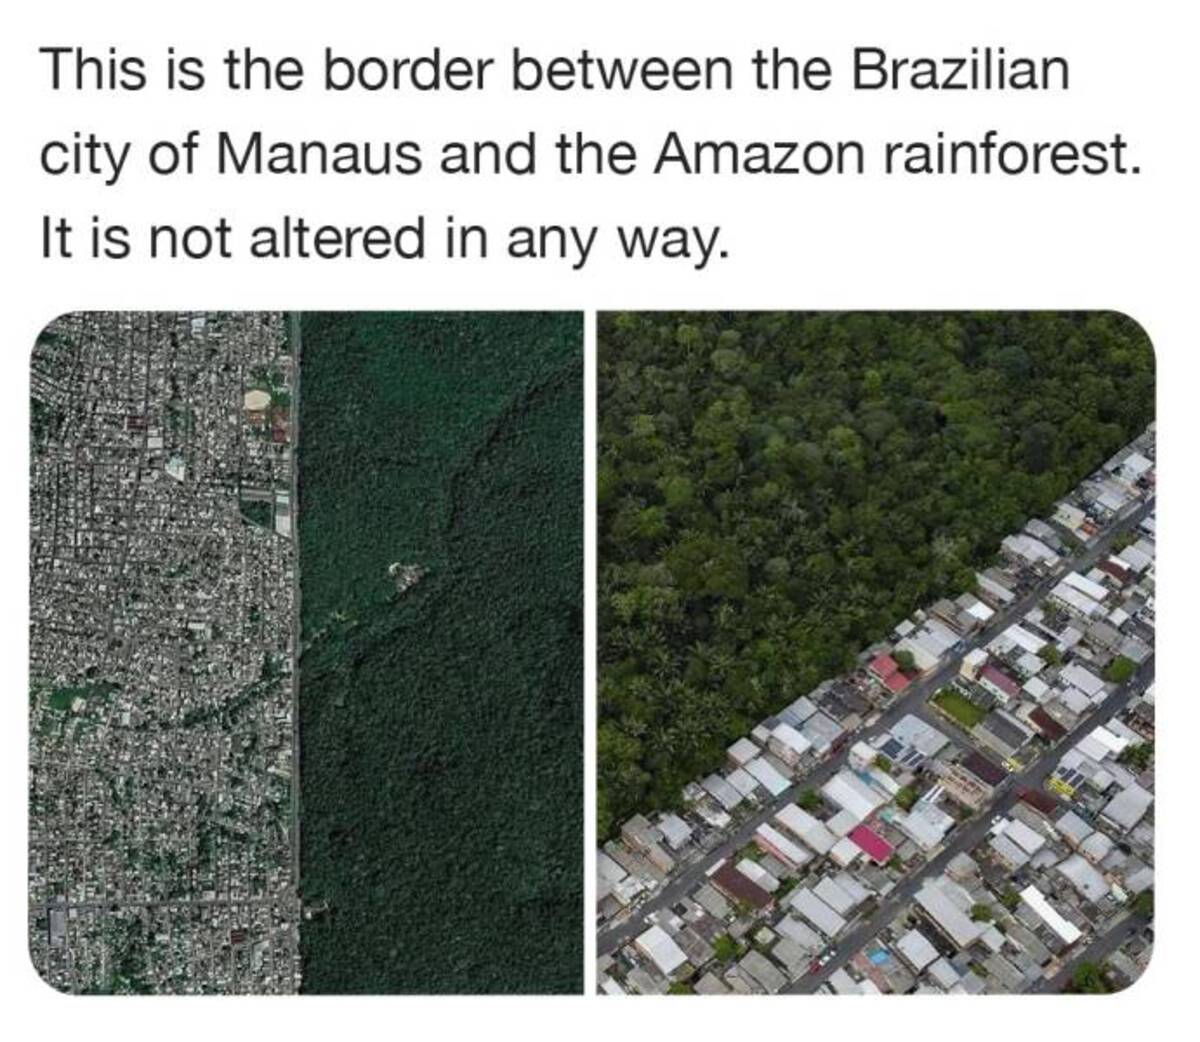 This is the border between the Brazilian city of Manaus and the Amazon rainforest. It is not altered in any way.